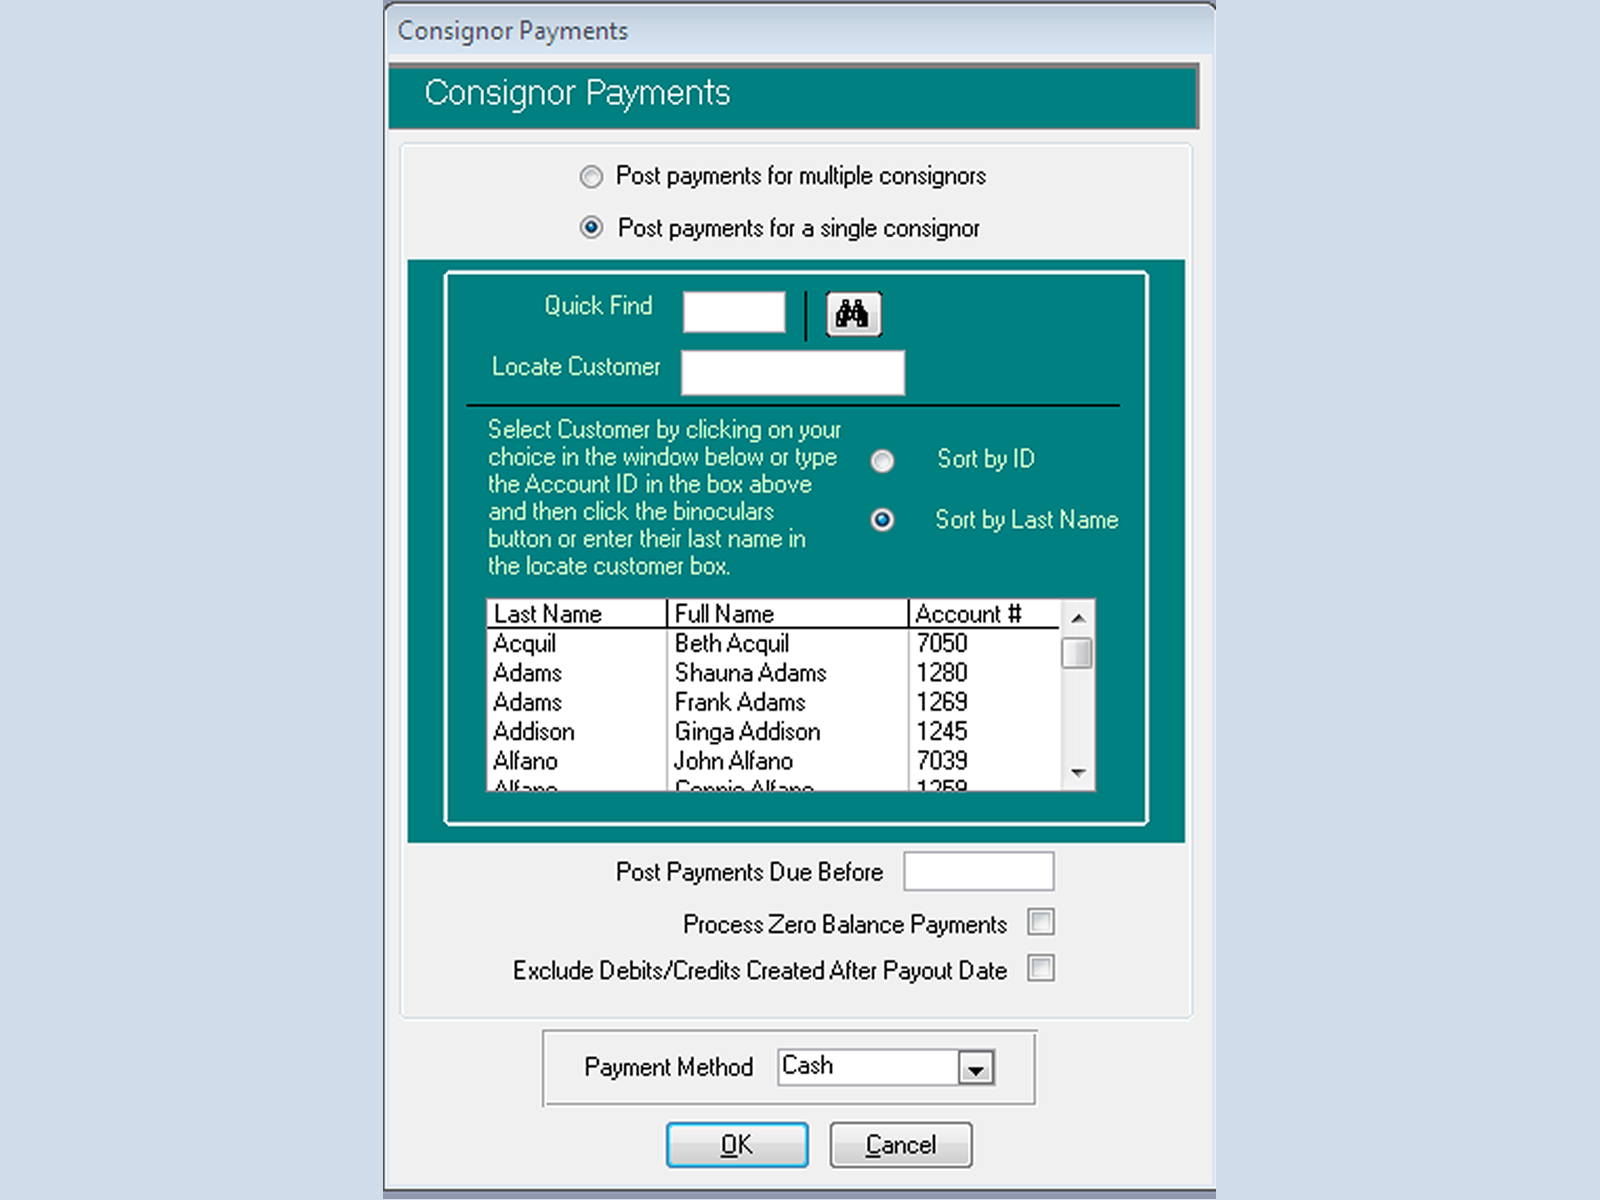 Payment Processing Screen - pay consignors